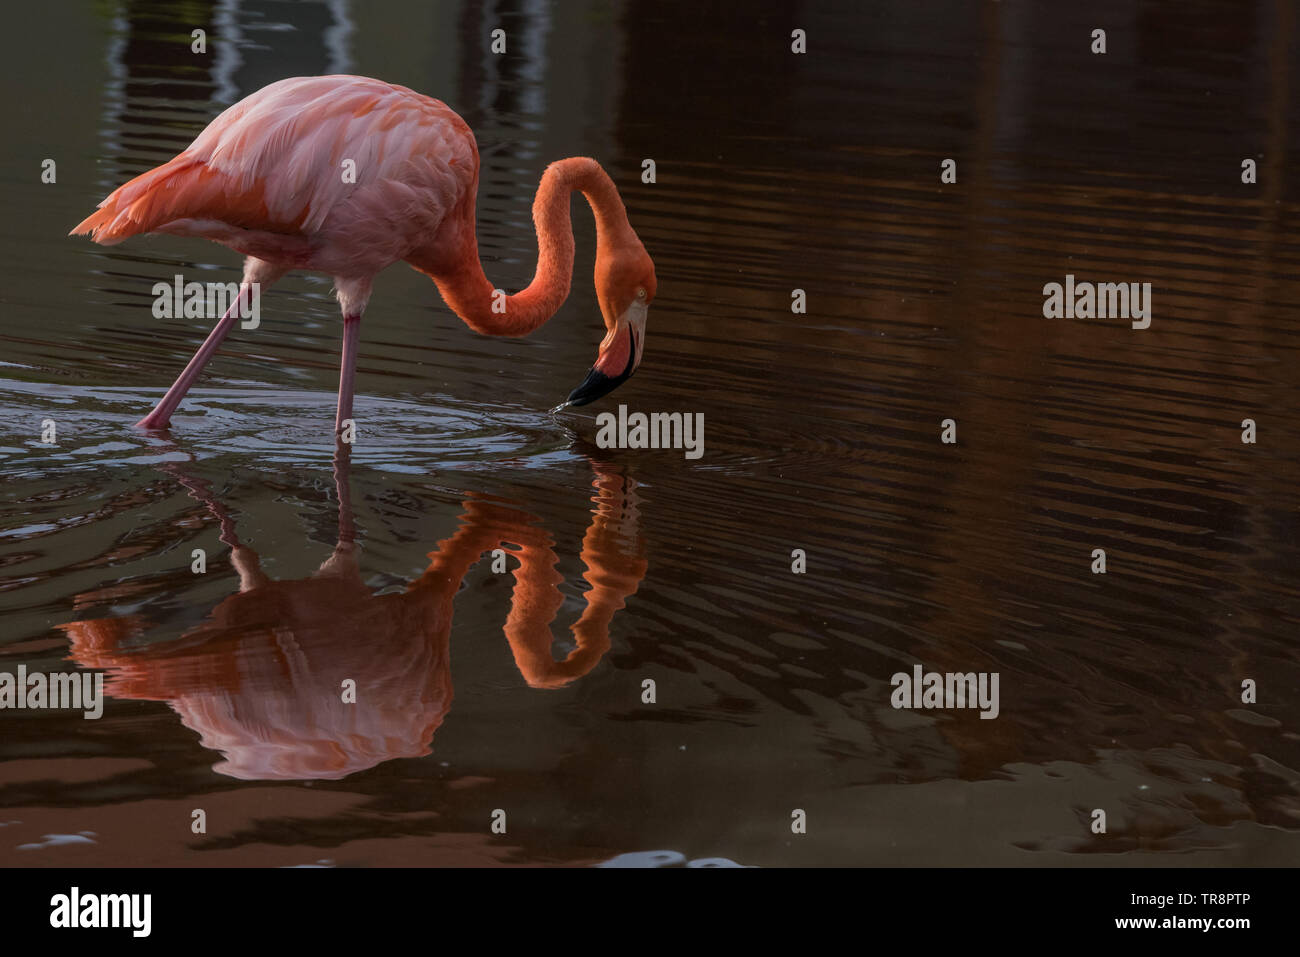 A wild american flamingo, Phoenicopterus ruber glyphorhynchus, from Isabela island in Ecuador. The birds in the Galapagos are considered a subspecies. Stock Photo